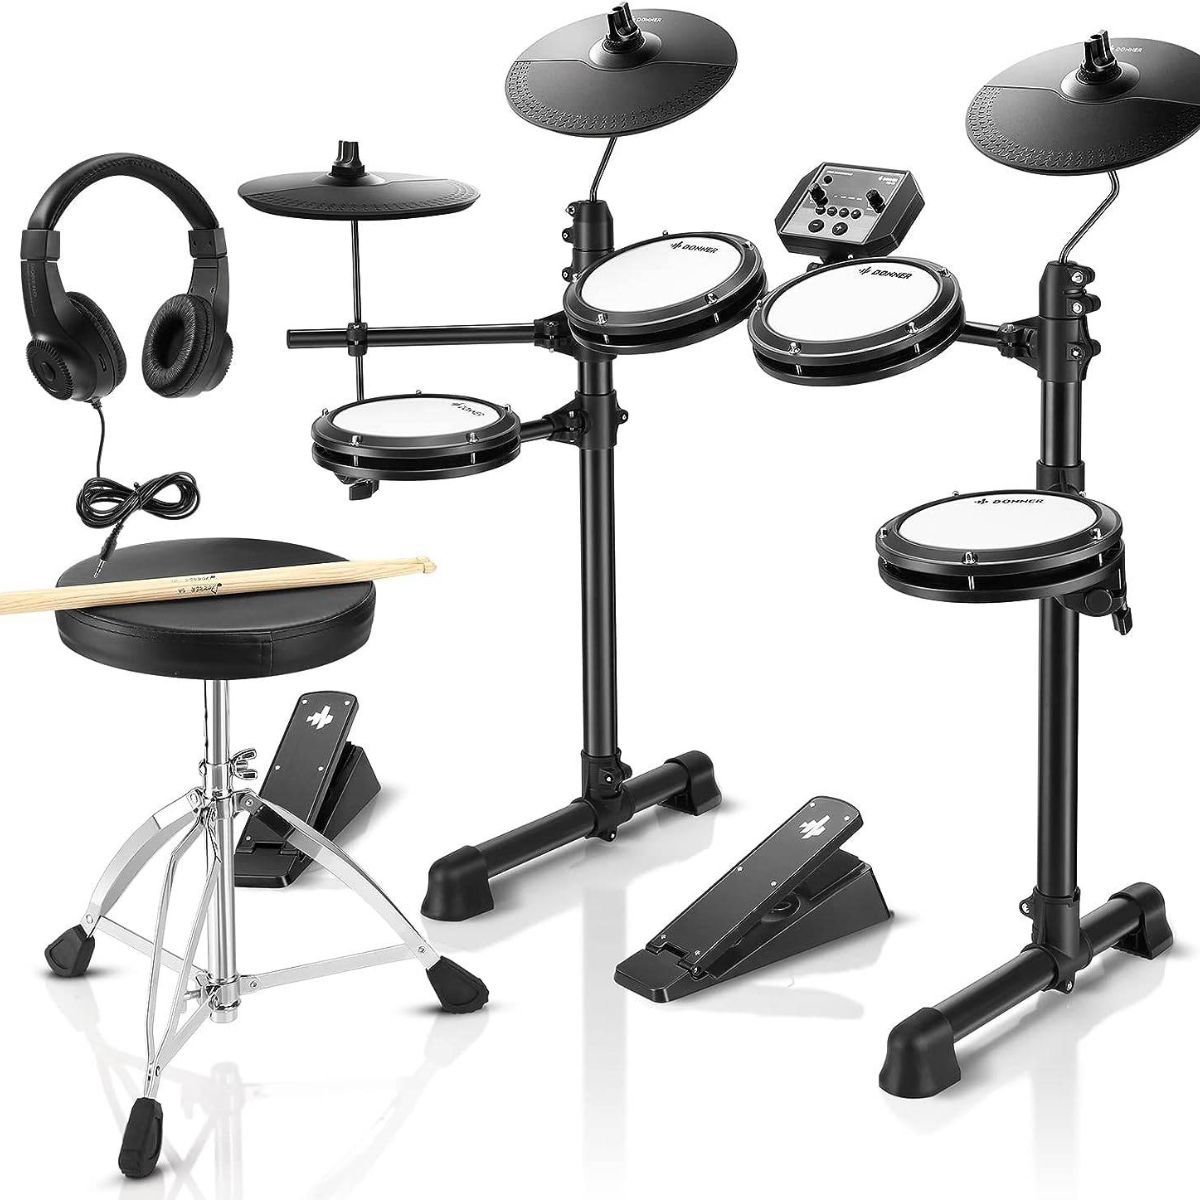 Donner DED-80P 5 Drums 3 Cymbals with Drum Throne/ Sticks